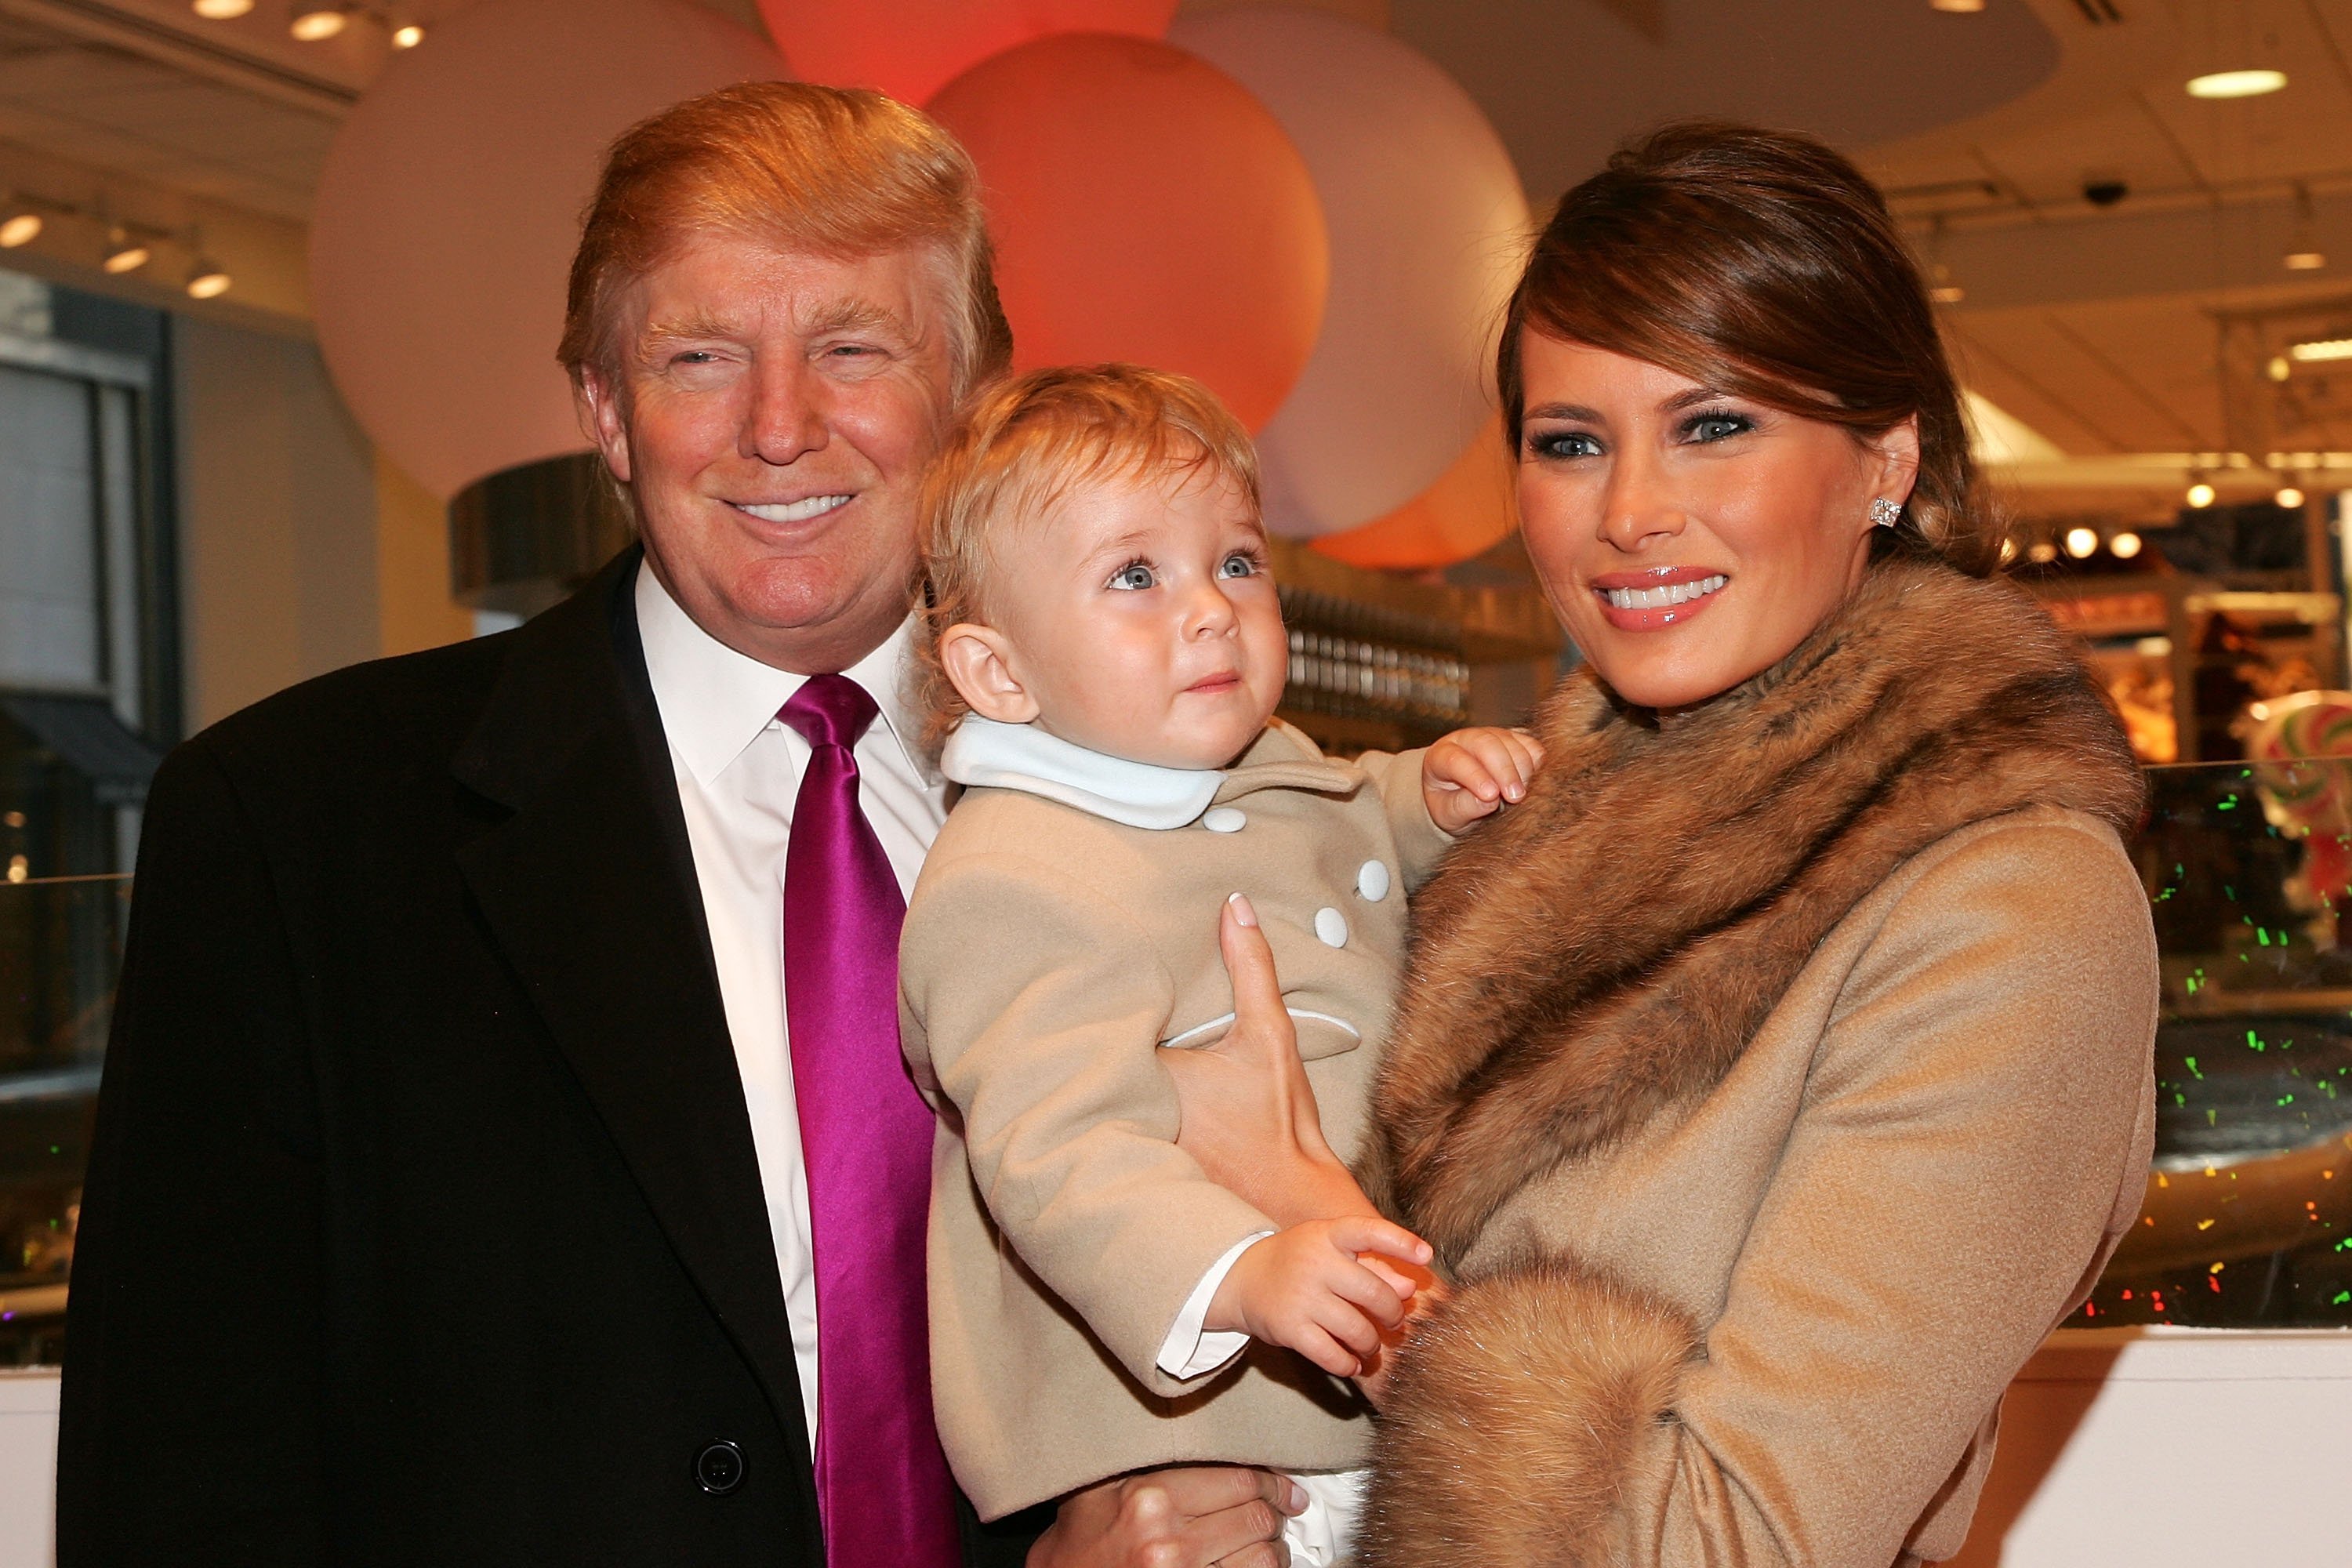 Donald Trump, Melania Trump and their son Barron at the Society of Memorial Sloan-Kettering Cancer Center's 16th Annual Bunny Hop March 13, 2007 in New York City. | Photo: Getty Images